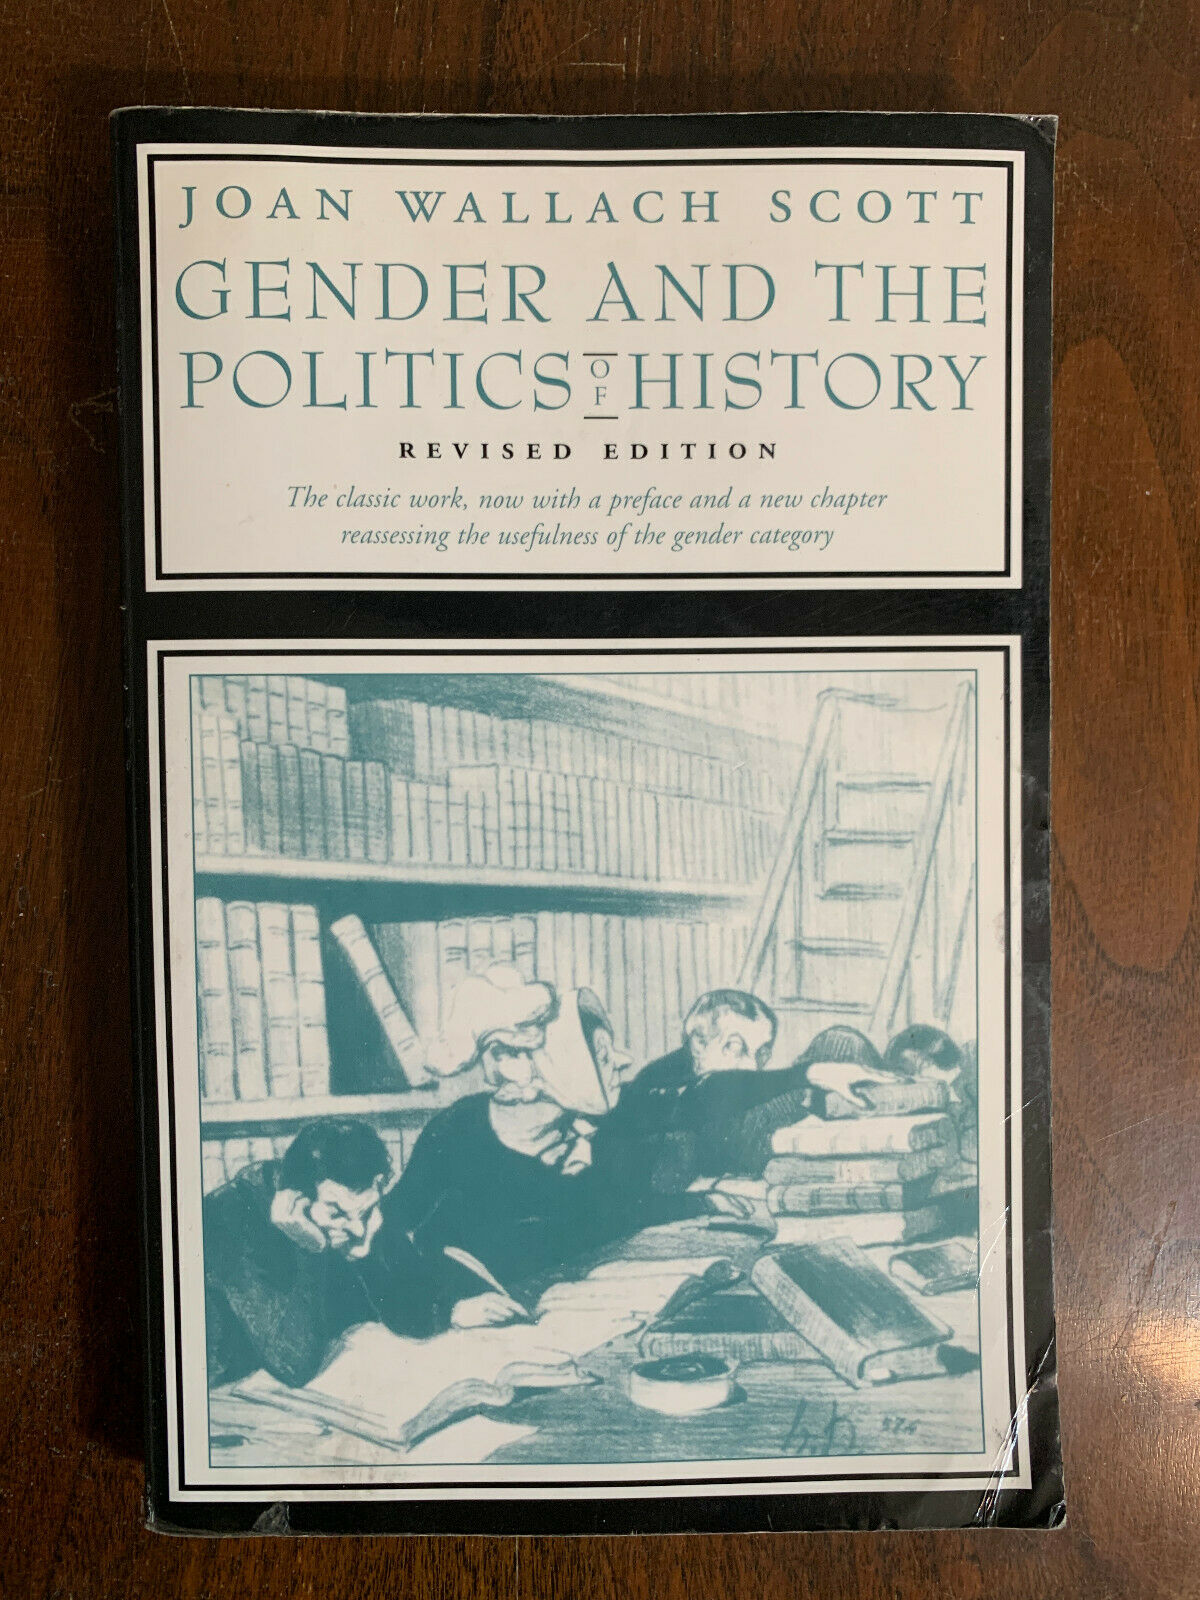 Gender and the Politics of History by Joan Wallach Scott (O2)